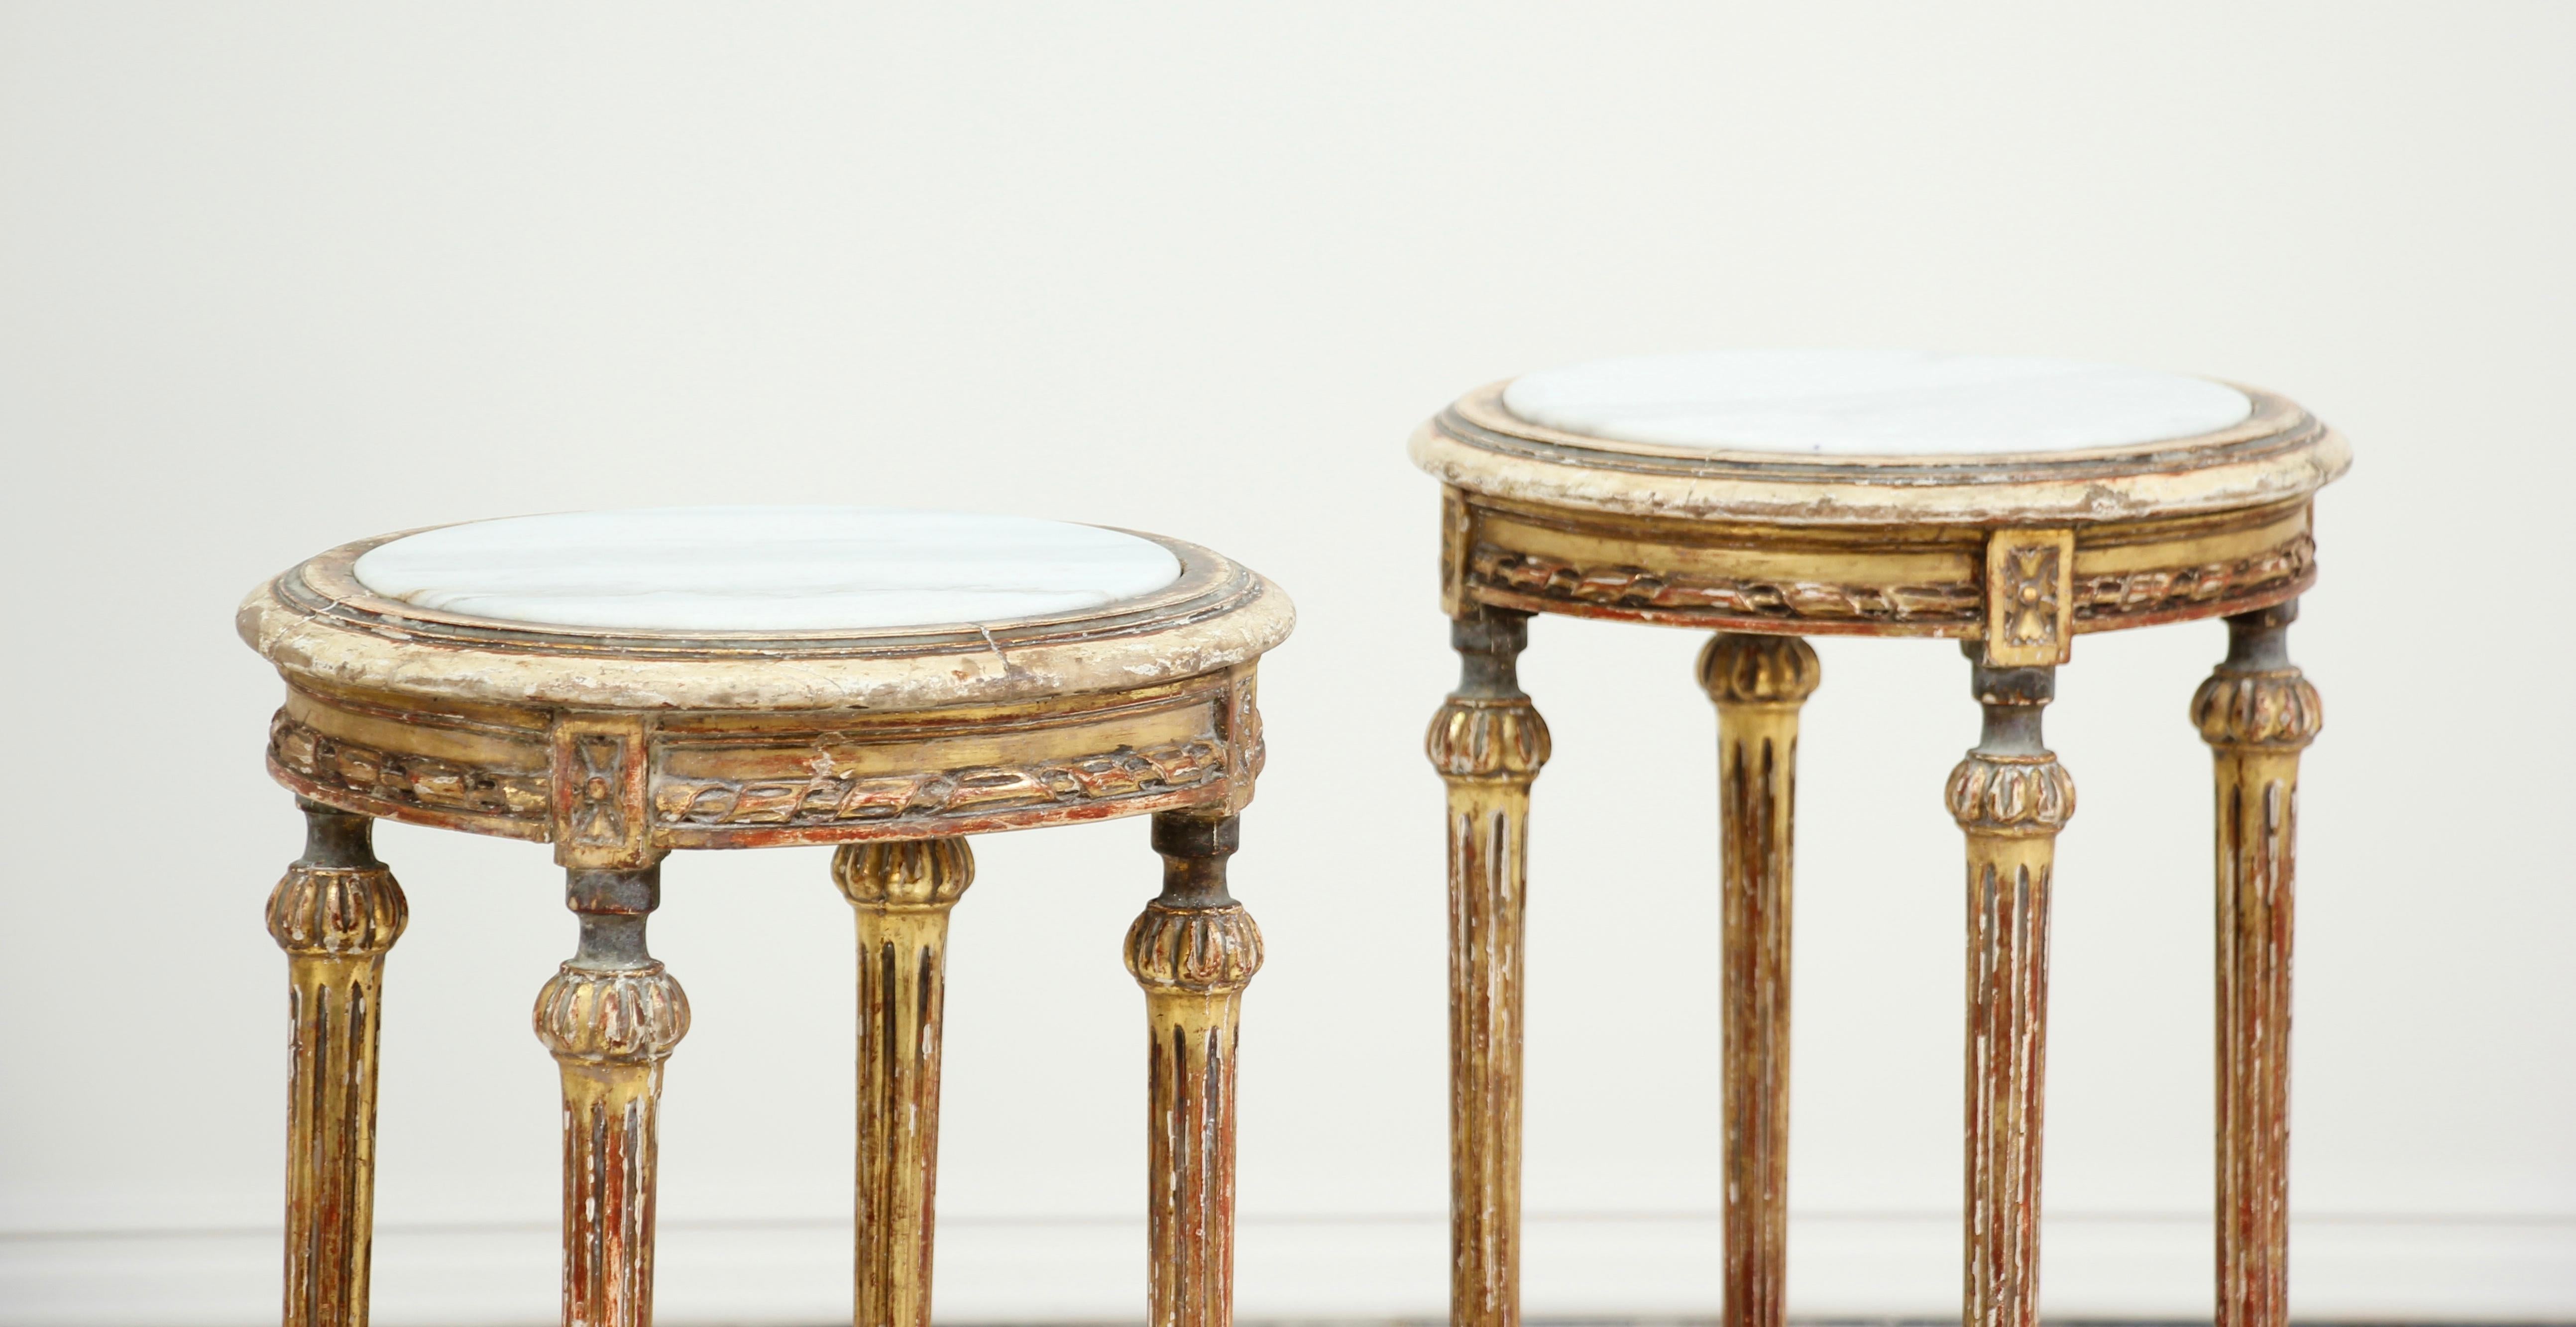 Beautiful, 1920s French Louis XVI style carved giltwood pedestal or side tables with Carrara marble tops. The original gilt finish is beautifully and naturally distressed. The tables are sturdy and strong, ready for many more years of use and